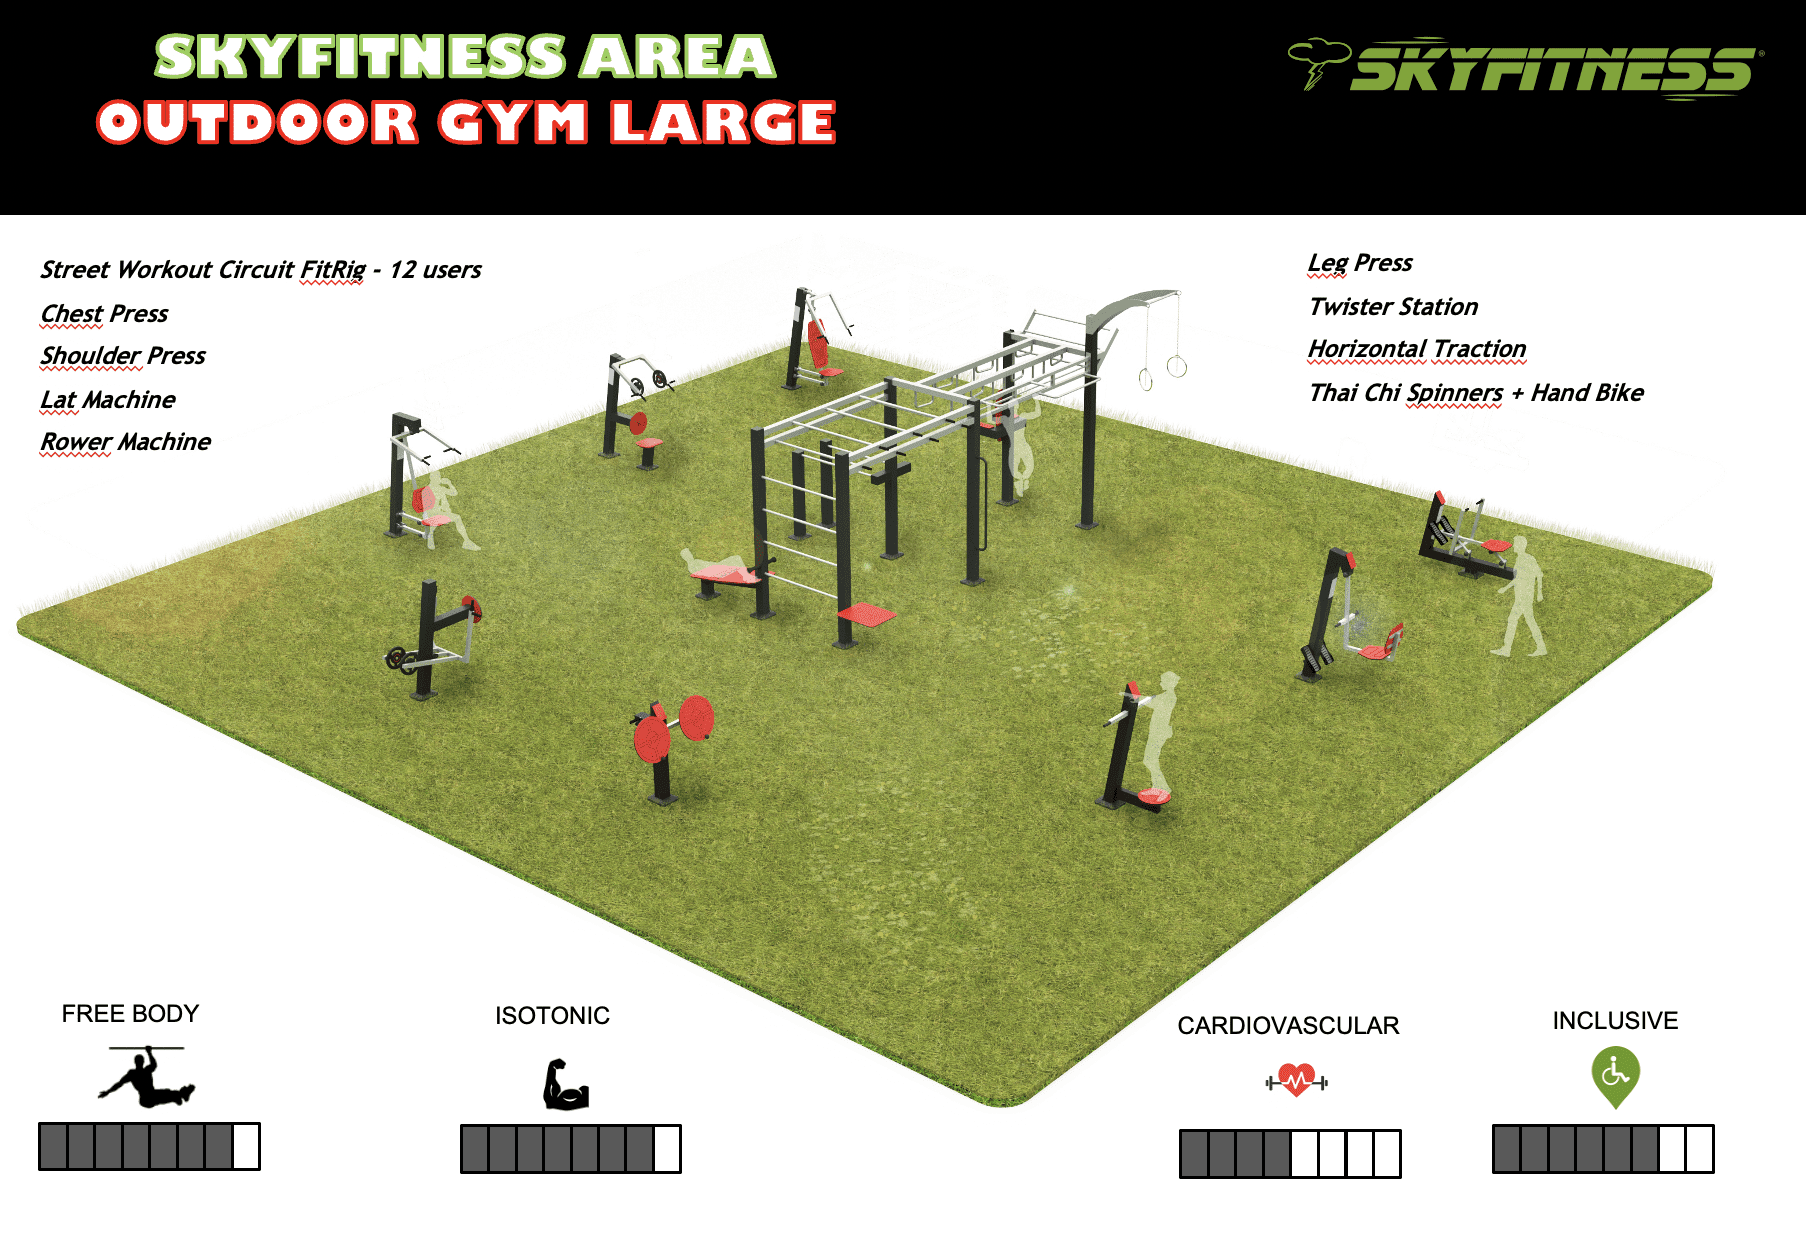 Outdoor gym large